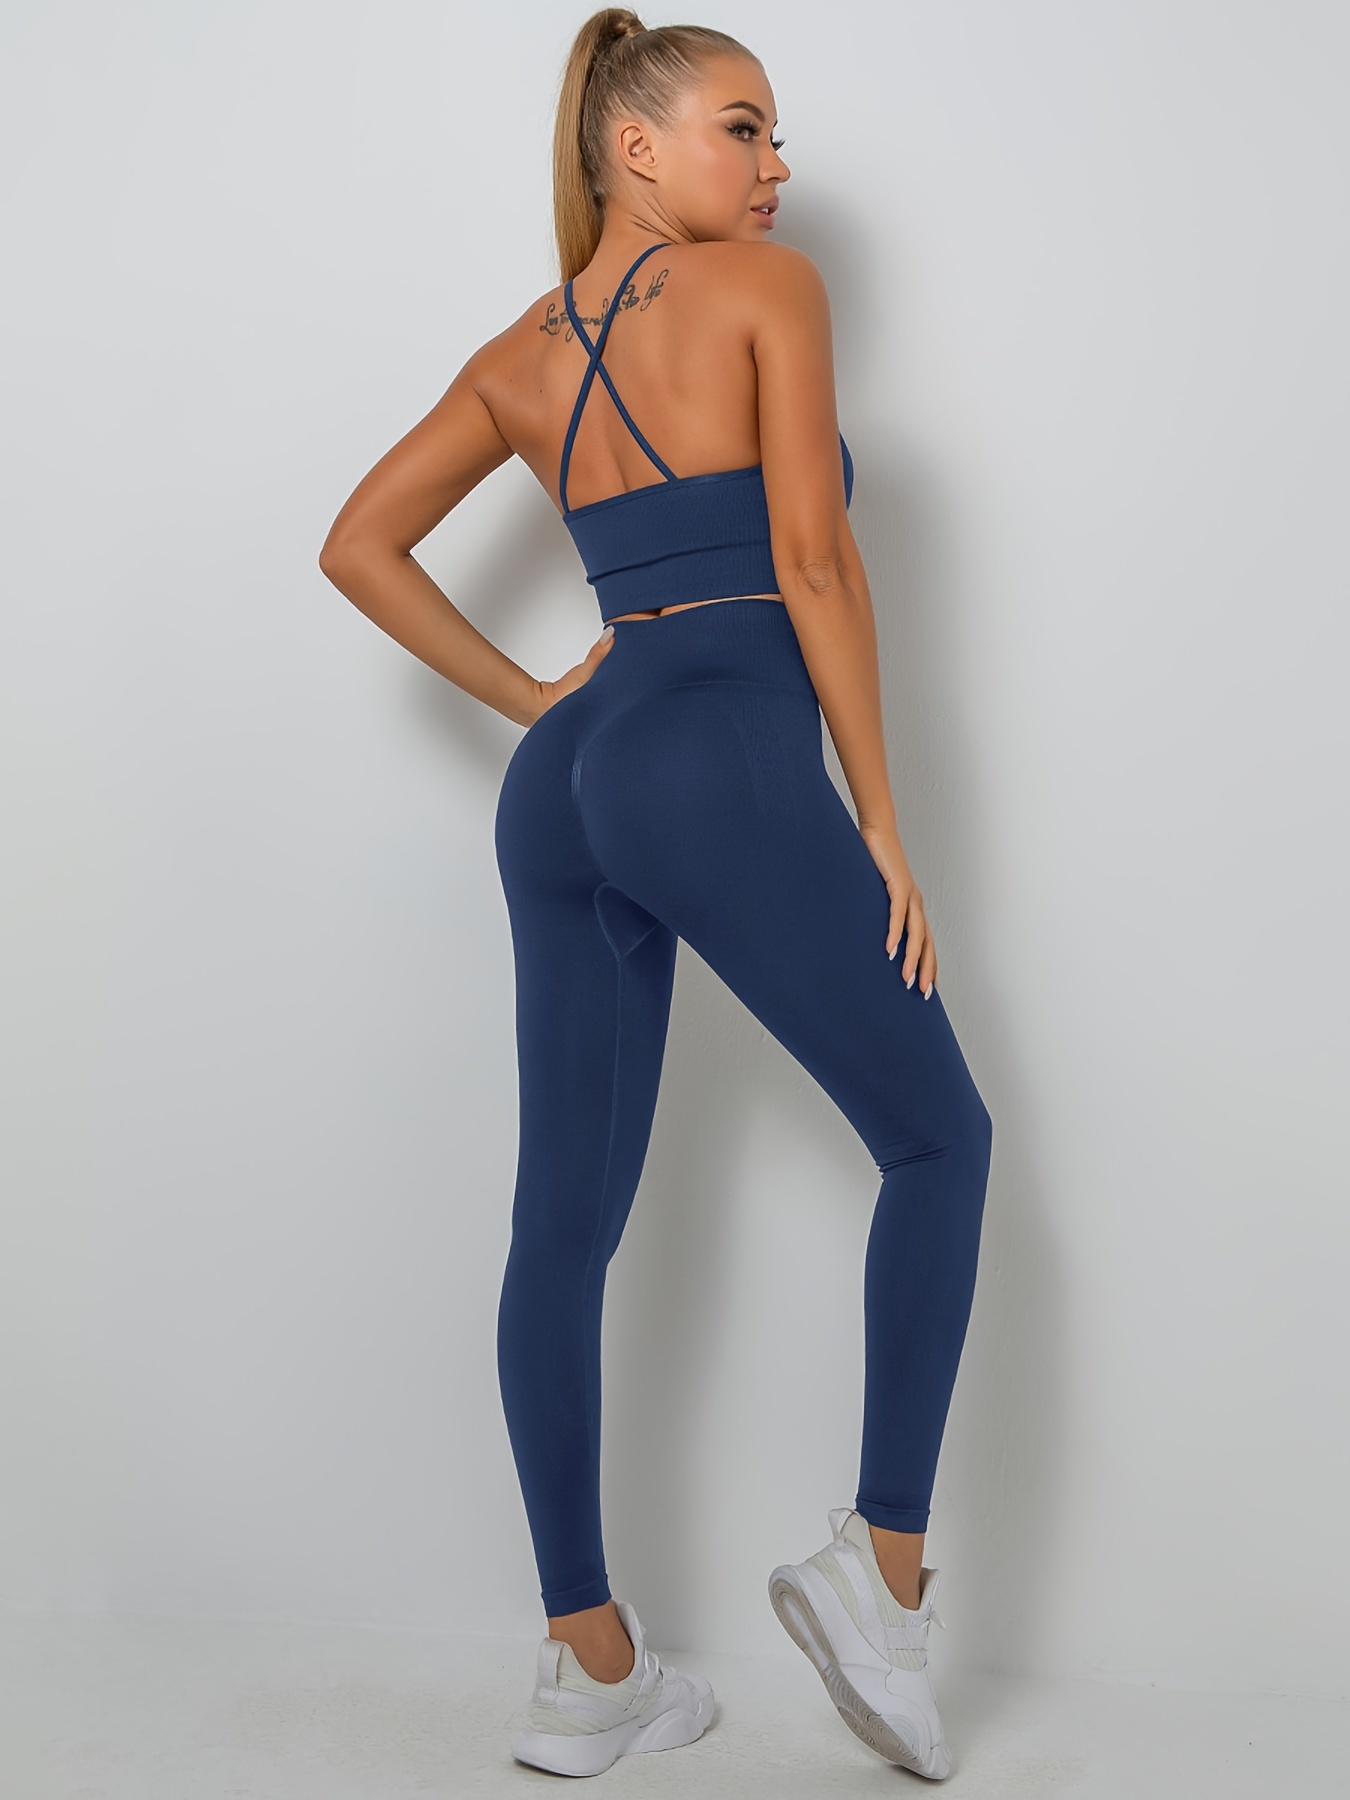 Womens Yoga Set Slim Fit Running And Gym Clothes With Seamless Sport Set  And Pants From Esfb, $25.58